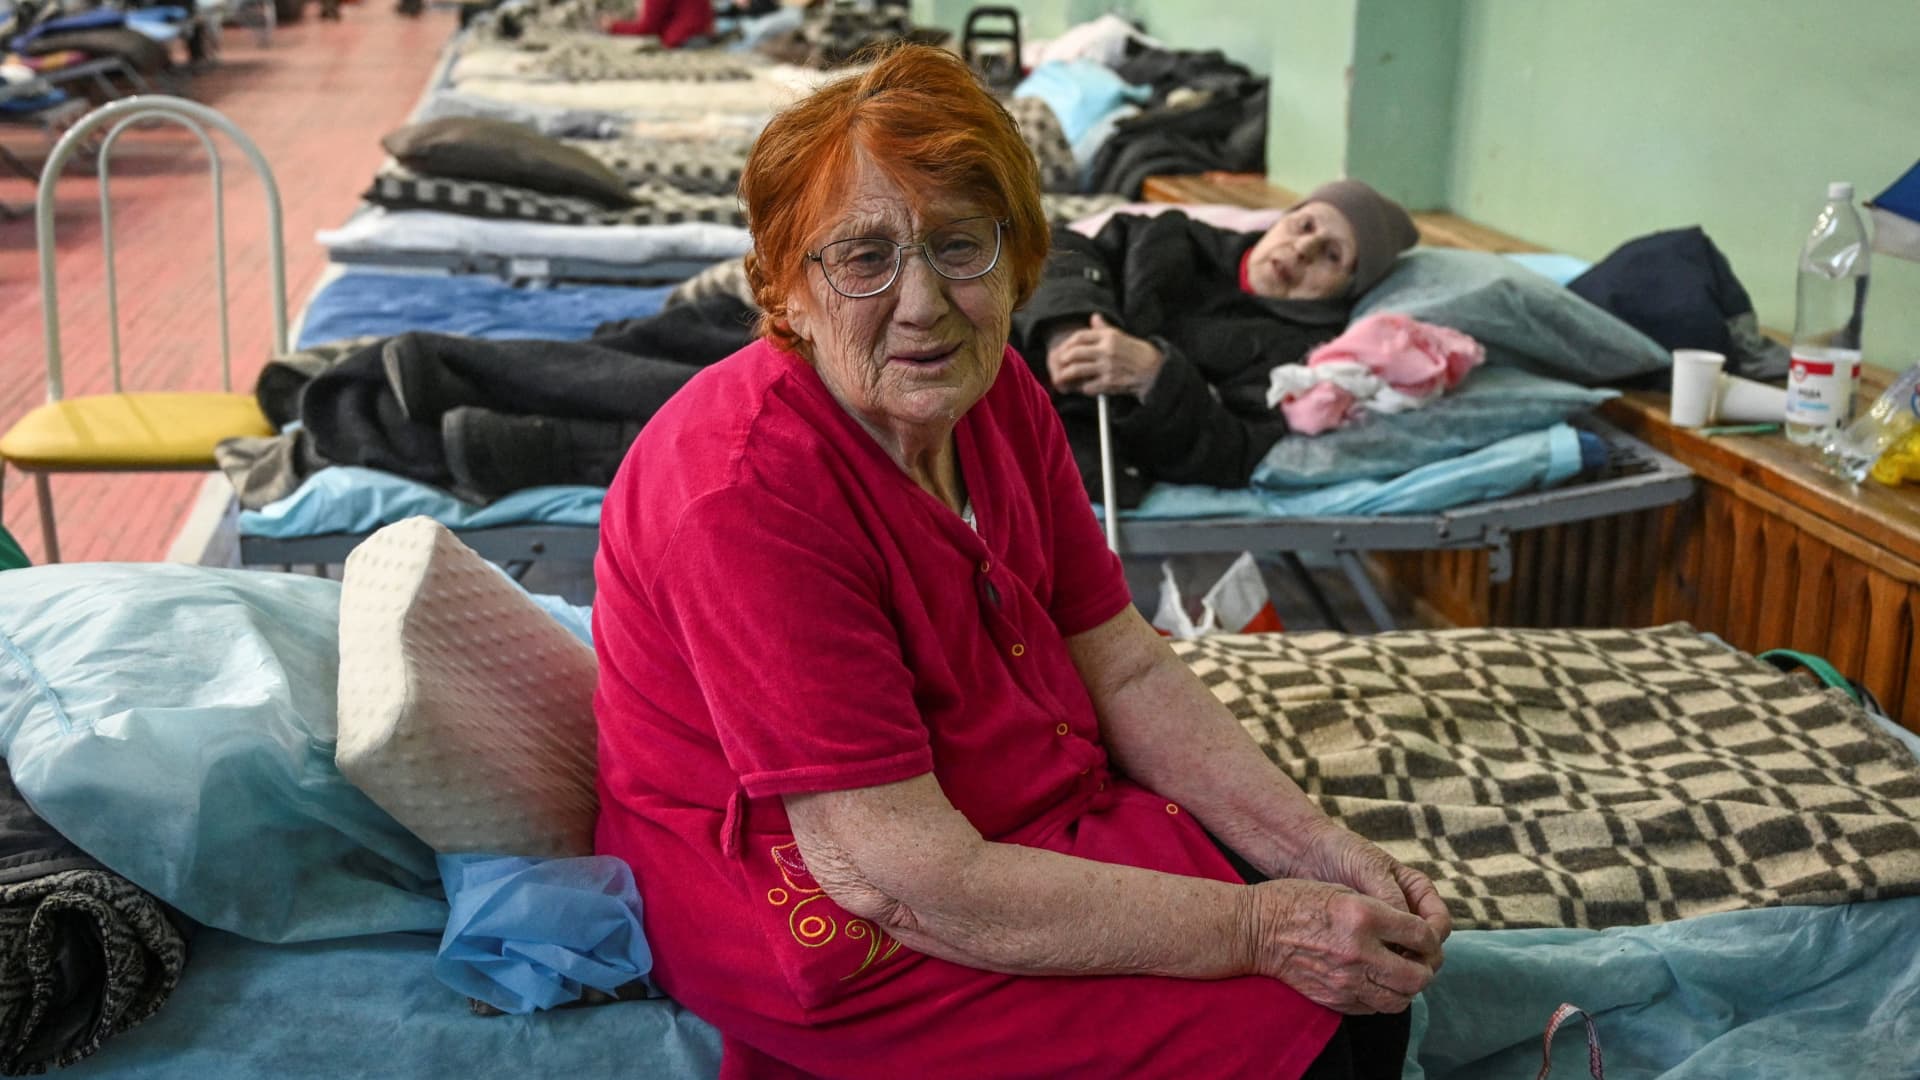 Raisa Kairat and Zinaida Bogdanova, residents of the Ukrainian city of Mariupol, react as they stay at a temporary accommodation centre for evacuees located in the building of a local sports school in Taganrog in the Rostov region, Russia March 23, 2022.